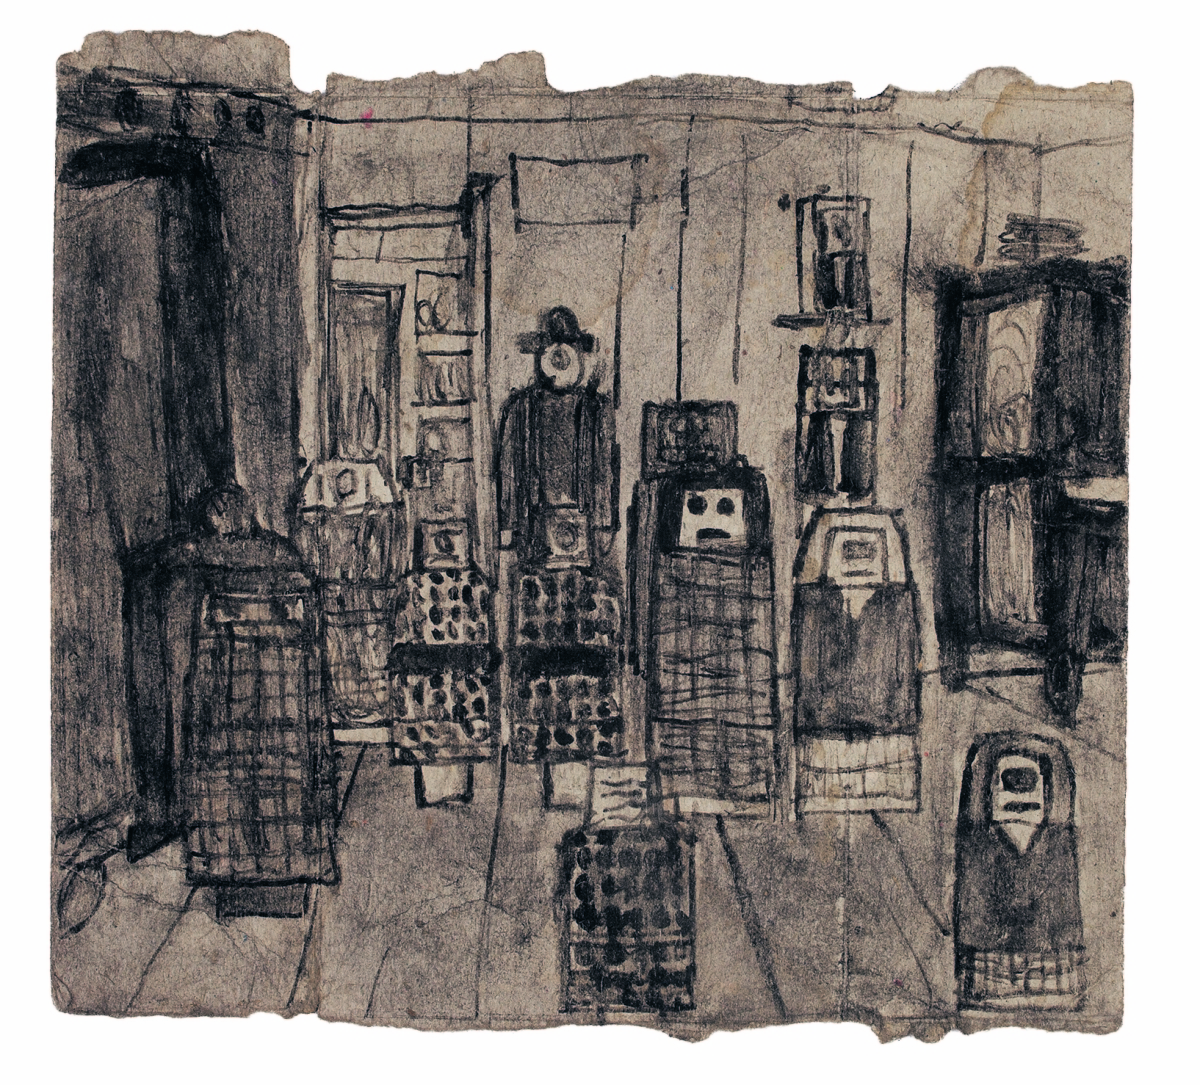 Untitled (interior with figures) by James Castle (1899-1977), no date.   Found paper, soot, 4¾ by 5¼ inches. CAS14-0228   ©James Castle Collection and Archive, all rights reserved.